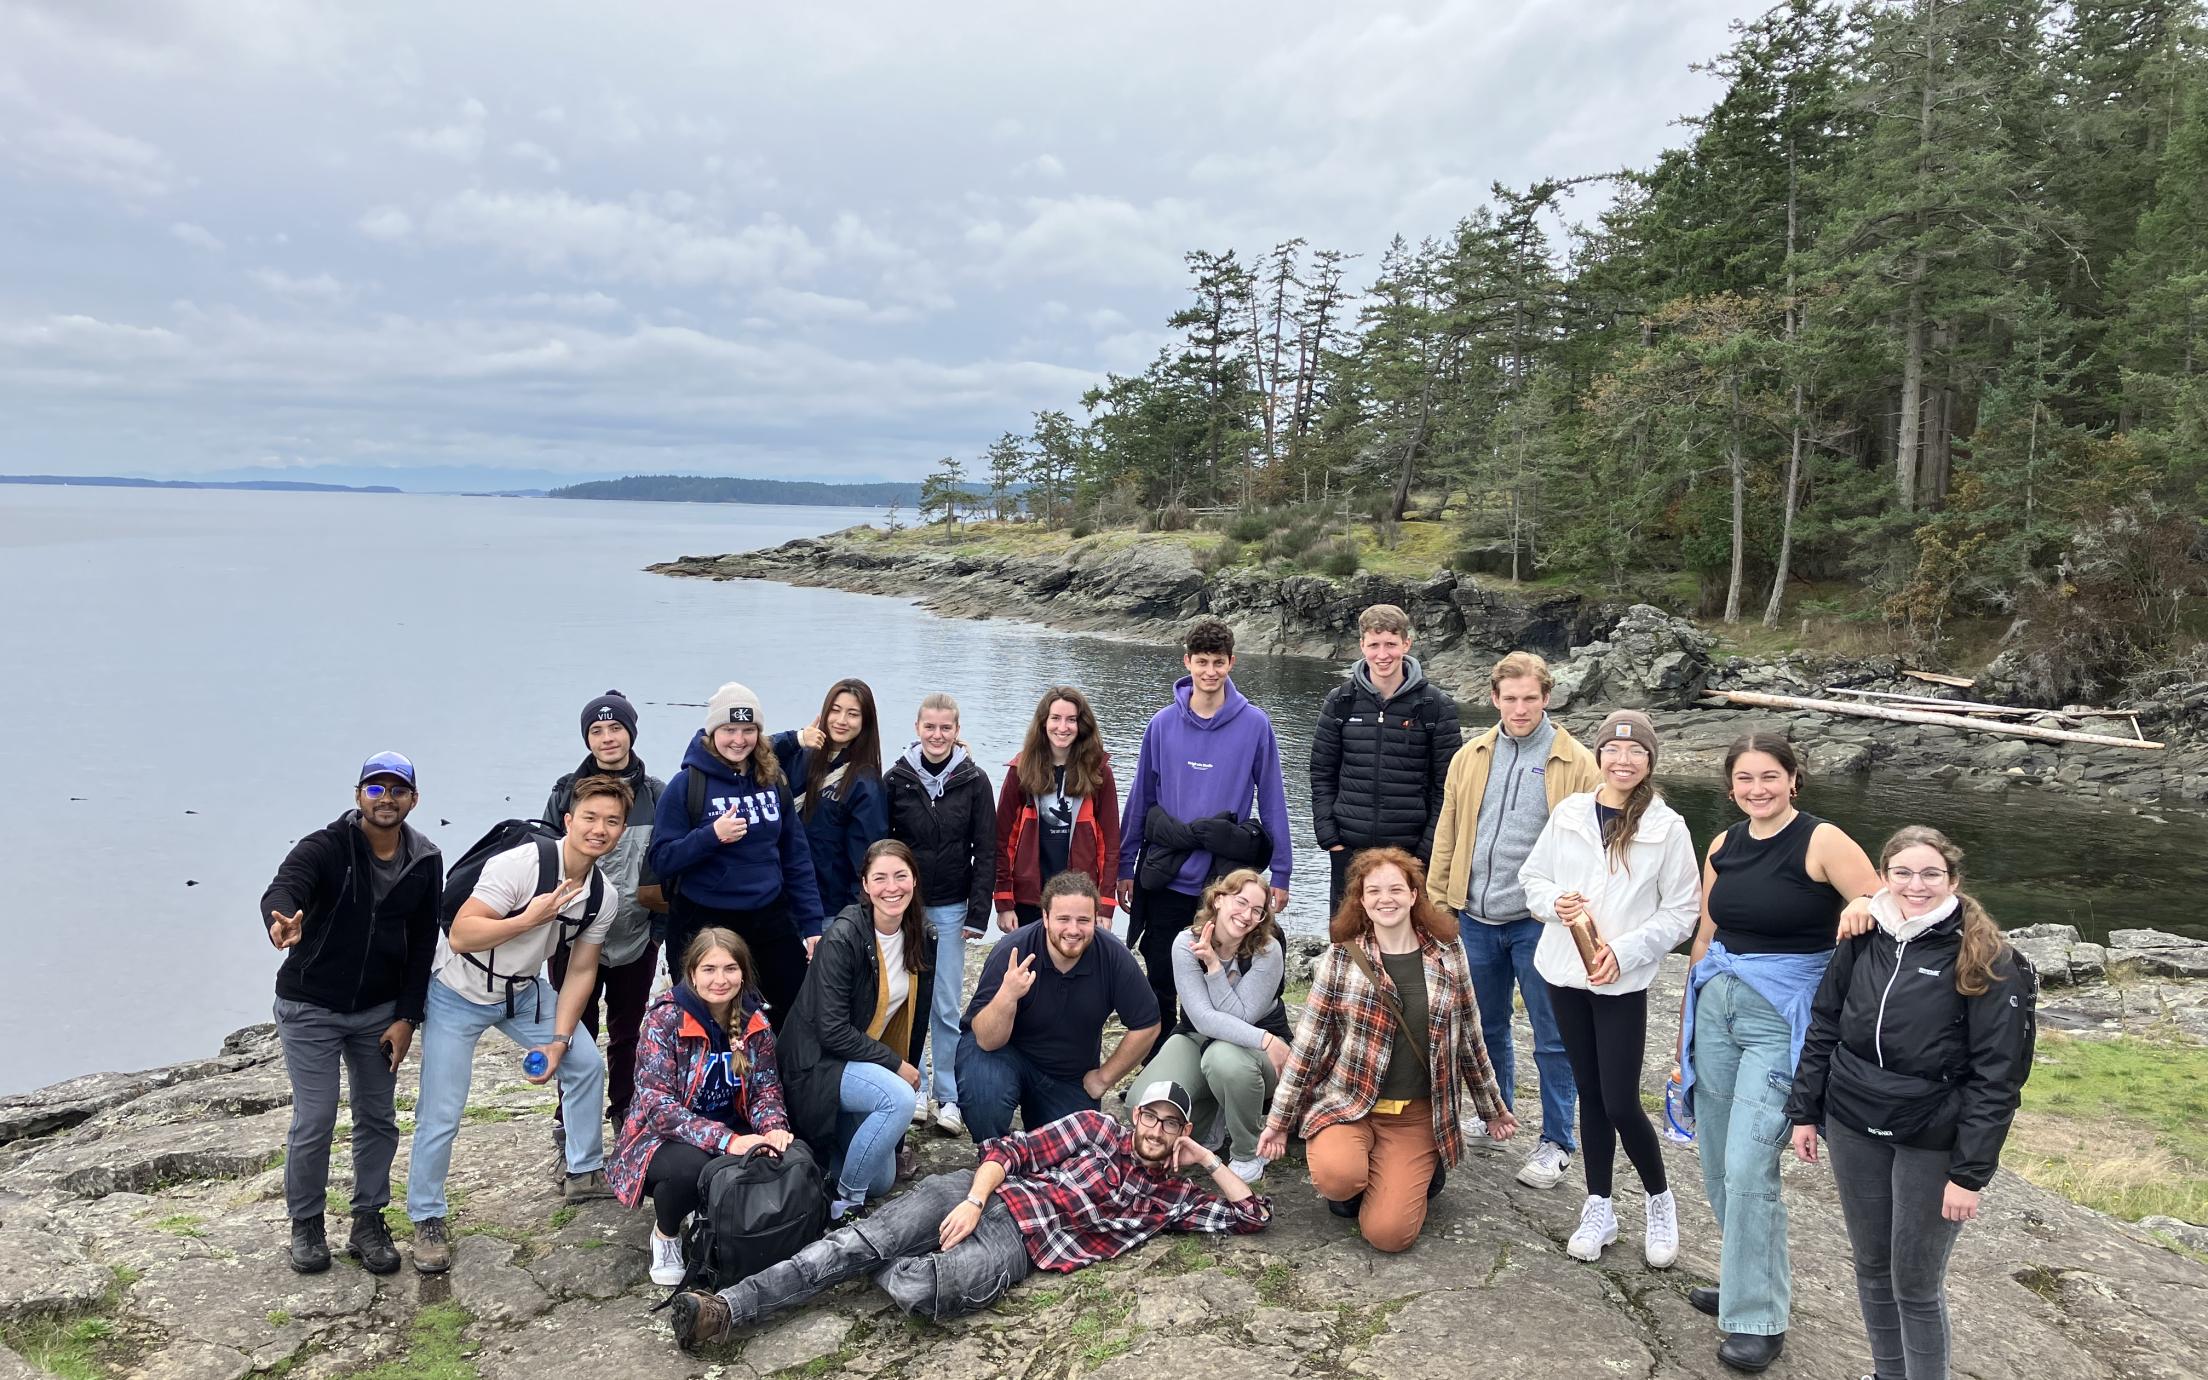 Group photo with a view of the ocean and trees behind them